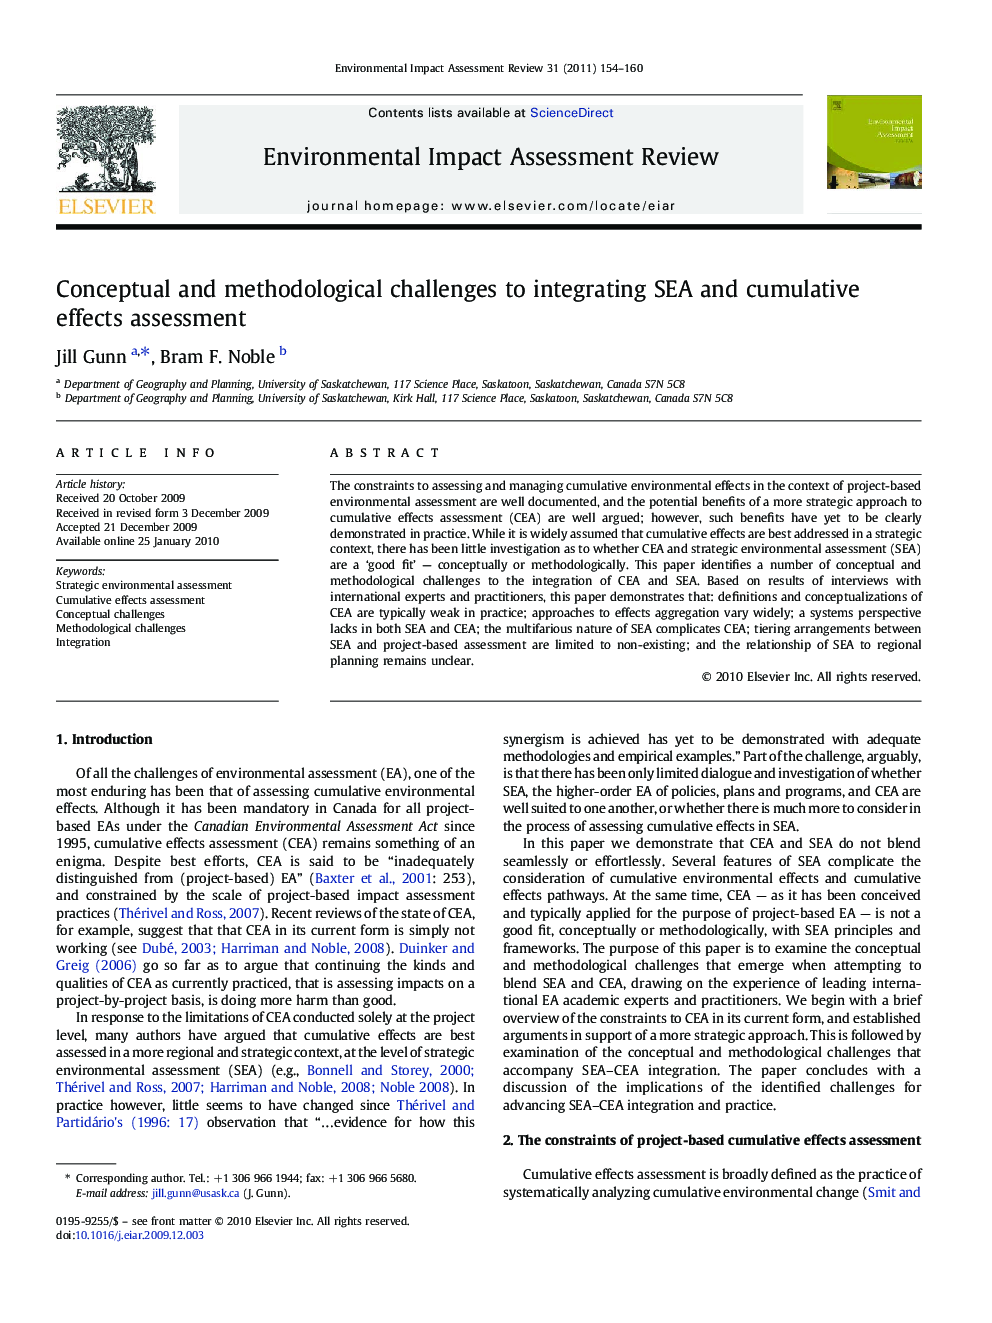 Conceptual and methodological challenges to integrating SEA and cumulative effects assessment